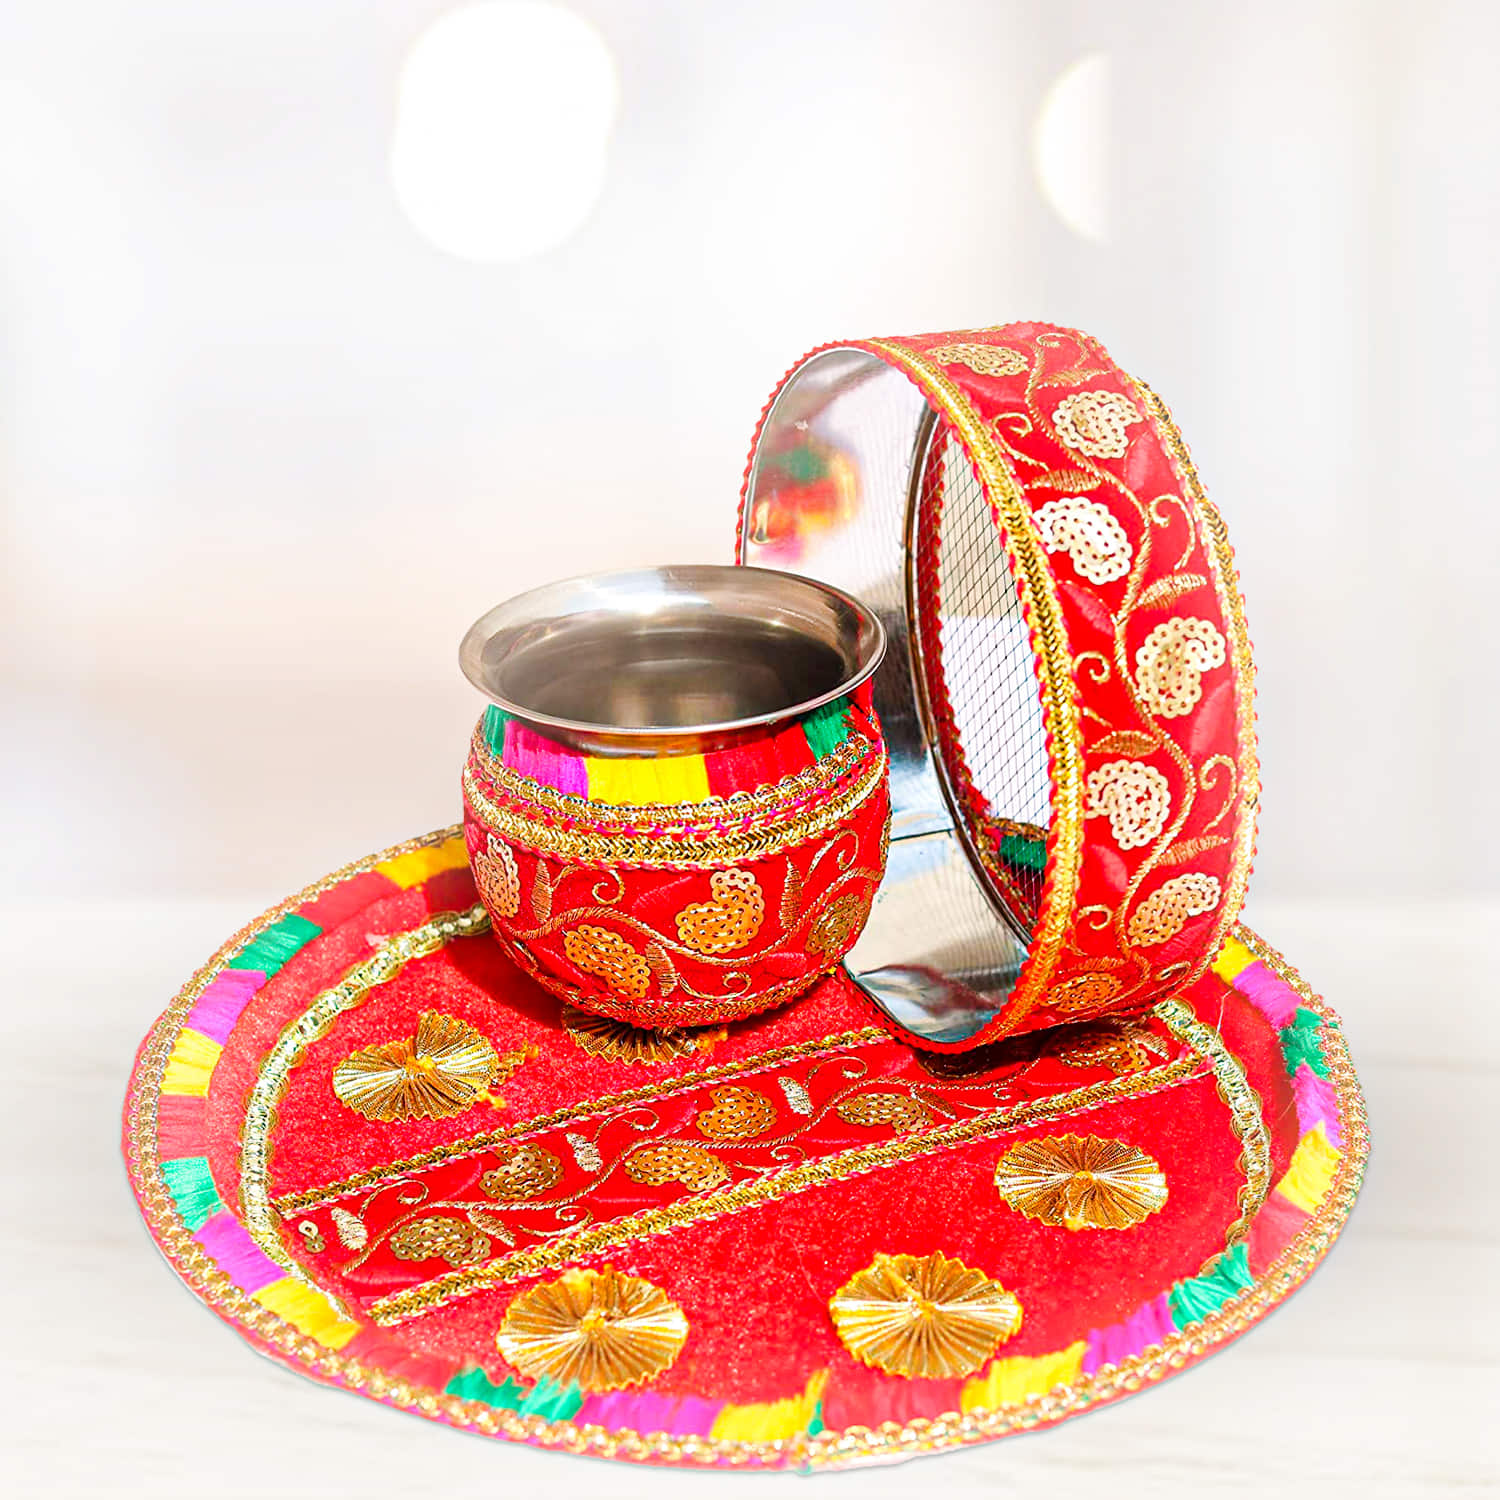 Check out 10 Amazing Karwa Chauth Gifts for your Wife Online